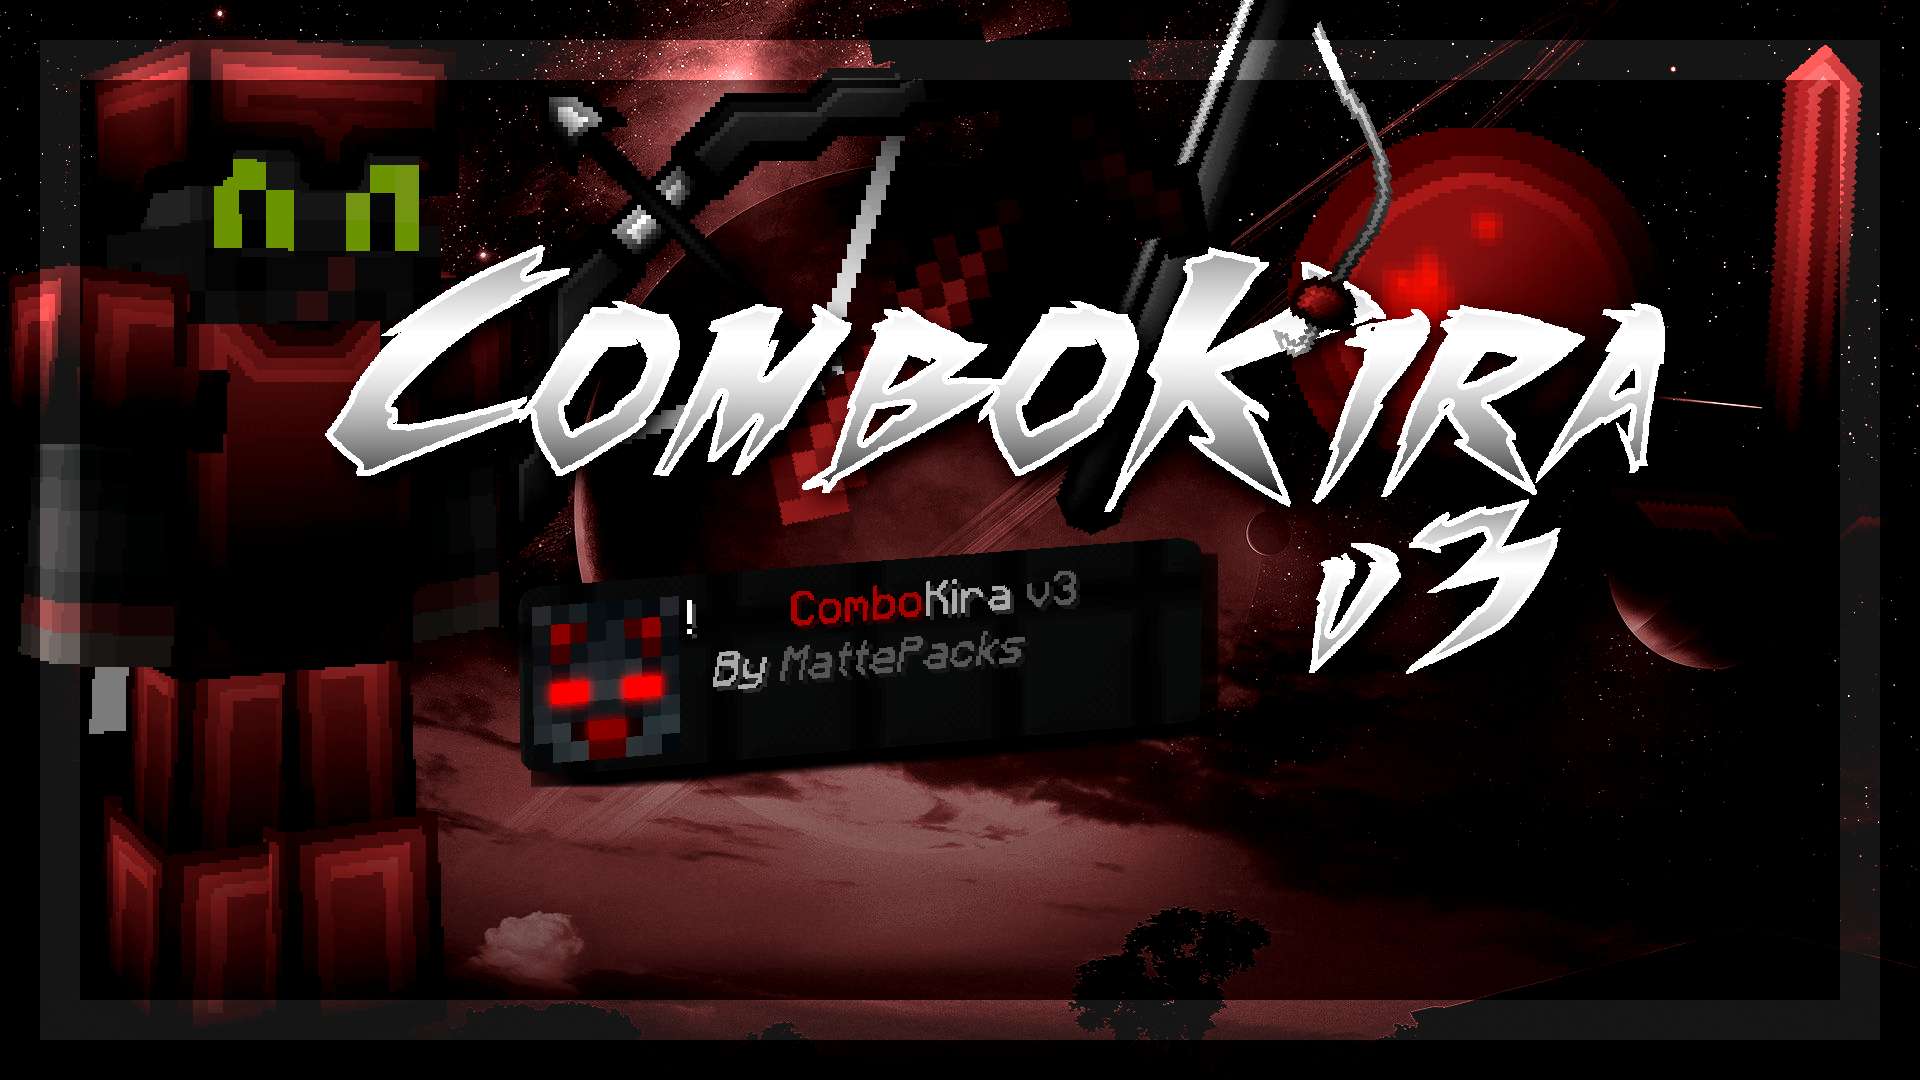 ComboKira v3 128x by MattePacks on PvPRP